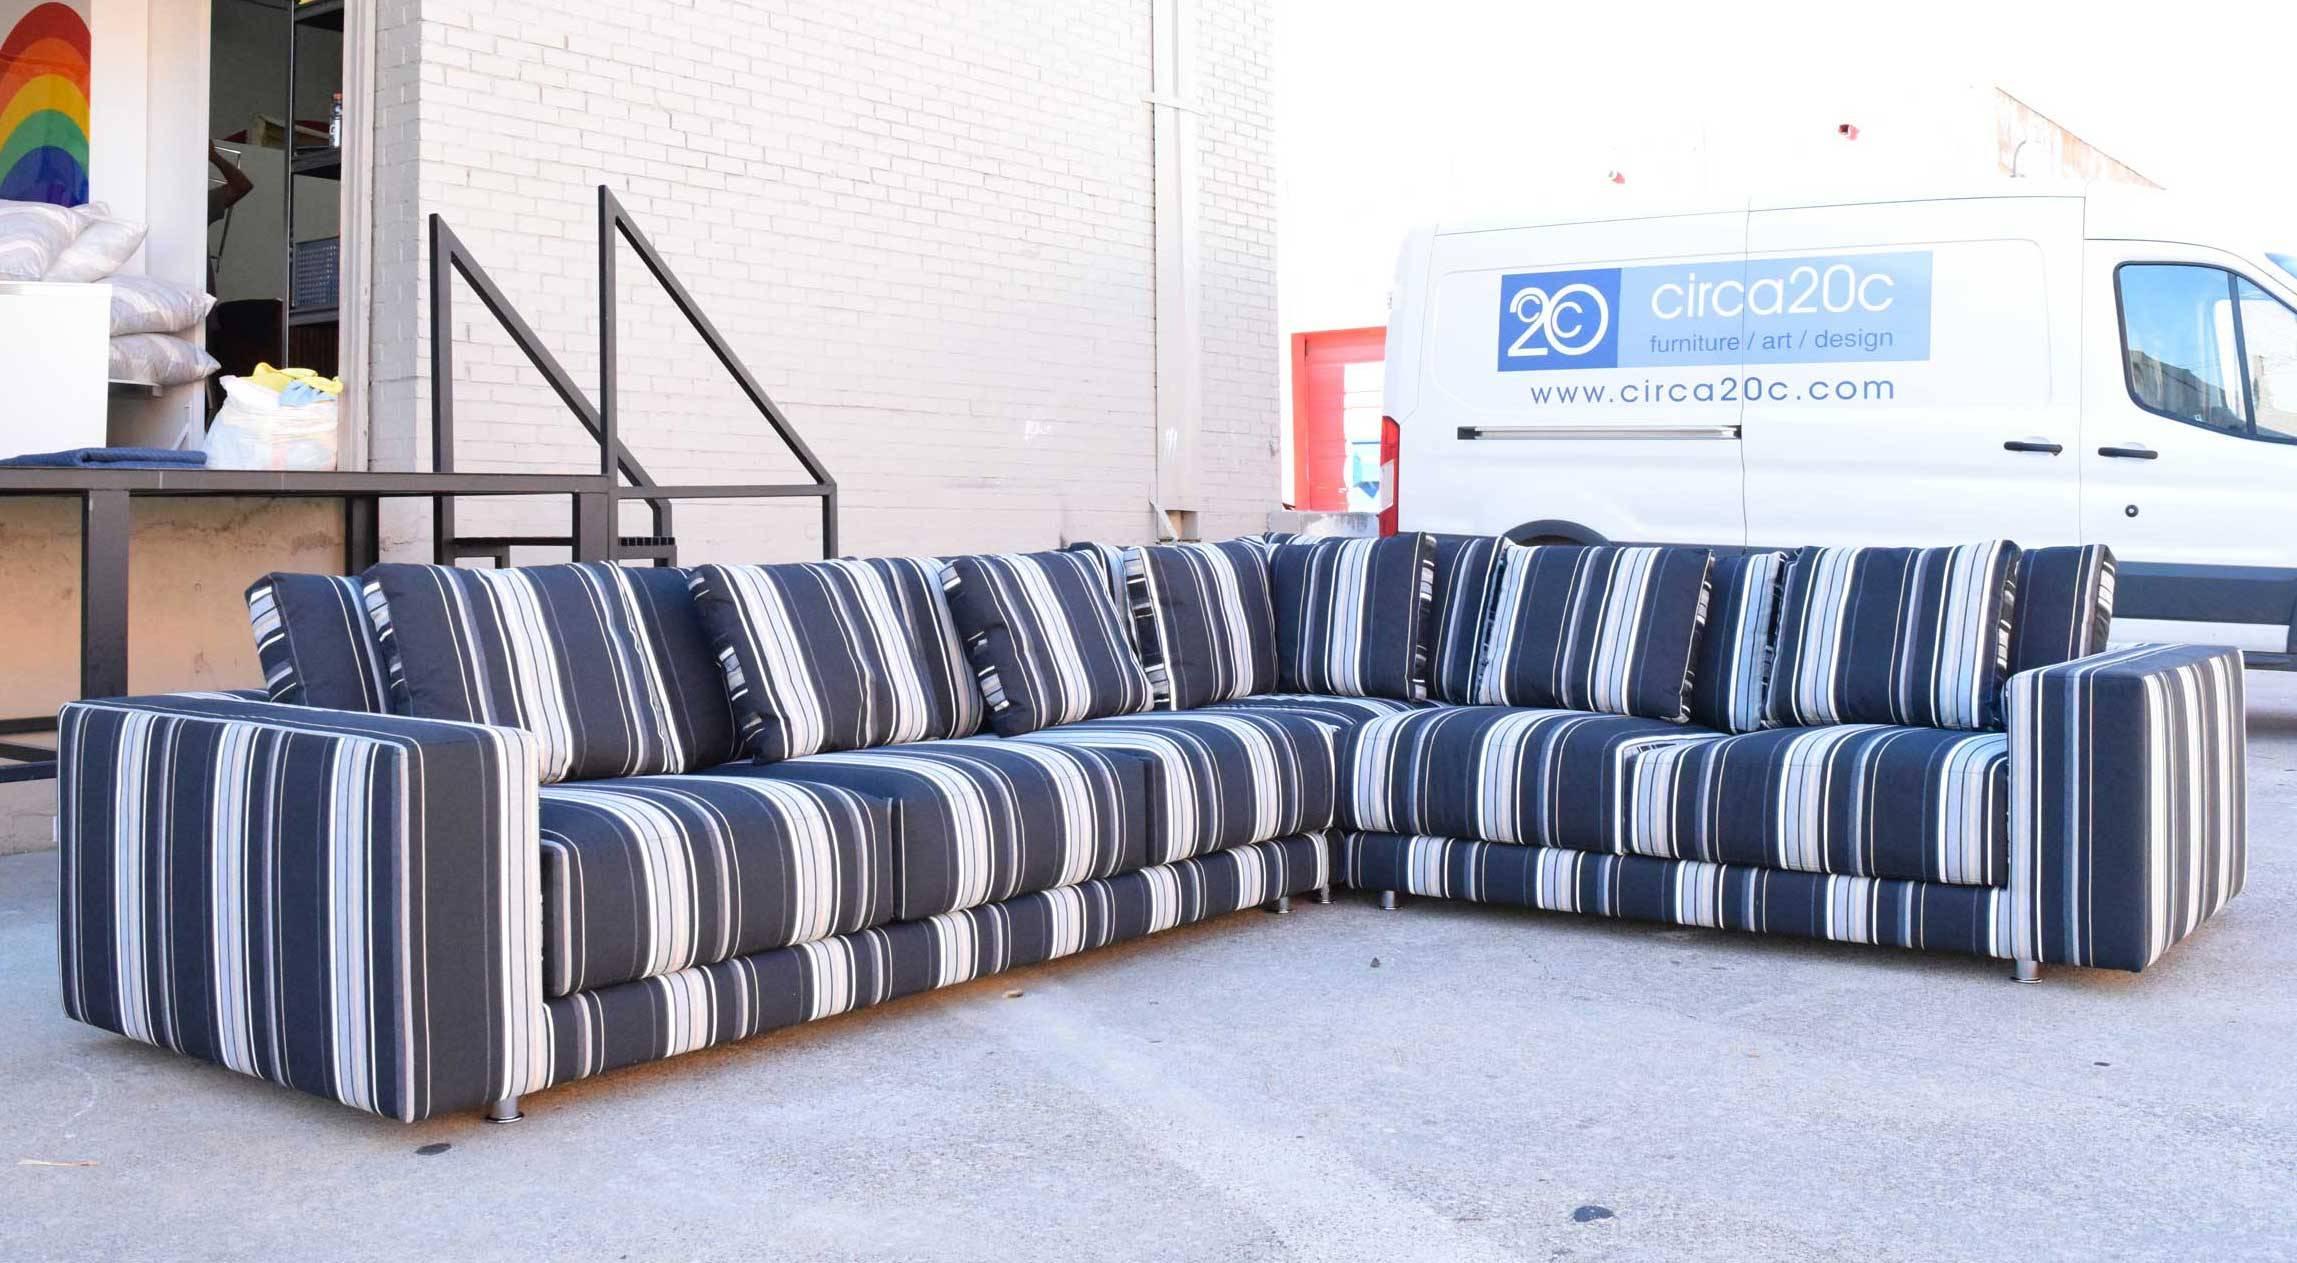 Like brand new, beautiful Della Robbia sectional in black, grey, white strips with touch of yellow. Three pieces include corner piece, three-seat section and a two seat section. Chrome legs that screw in.